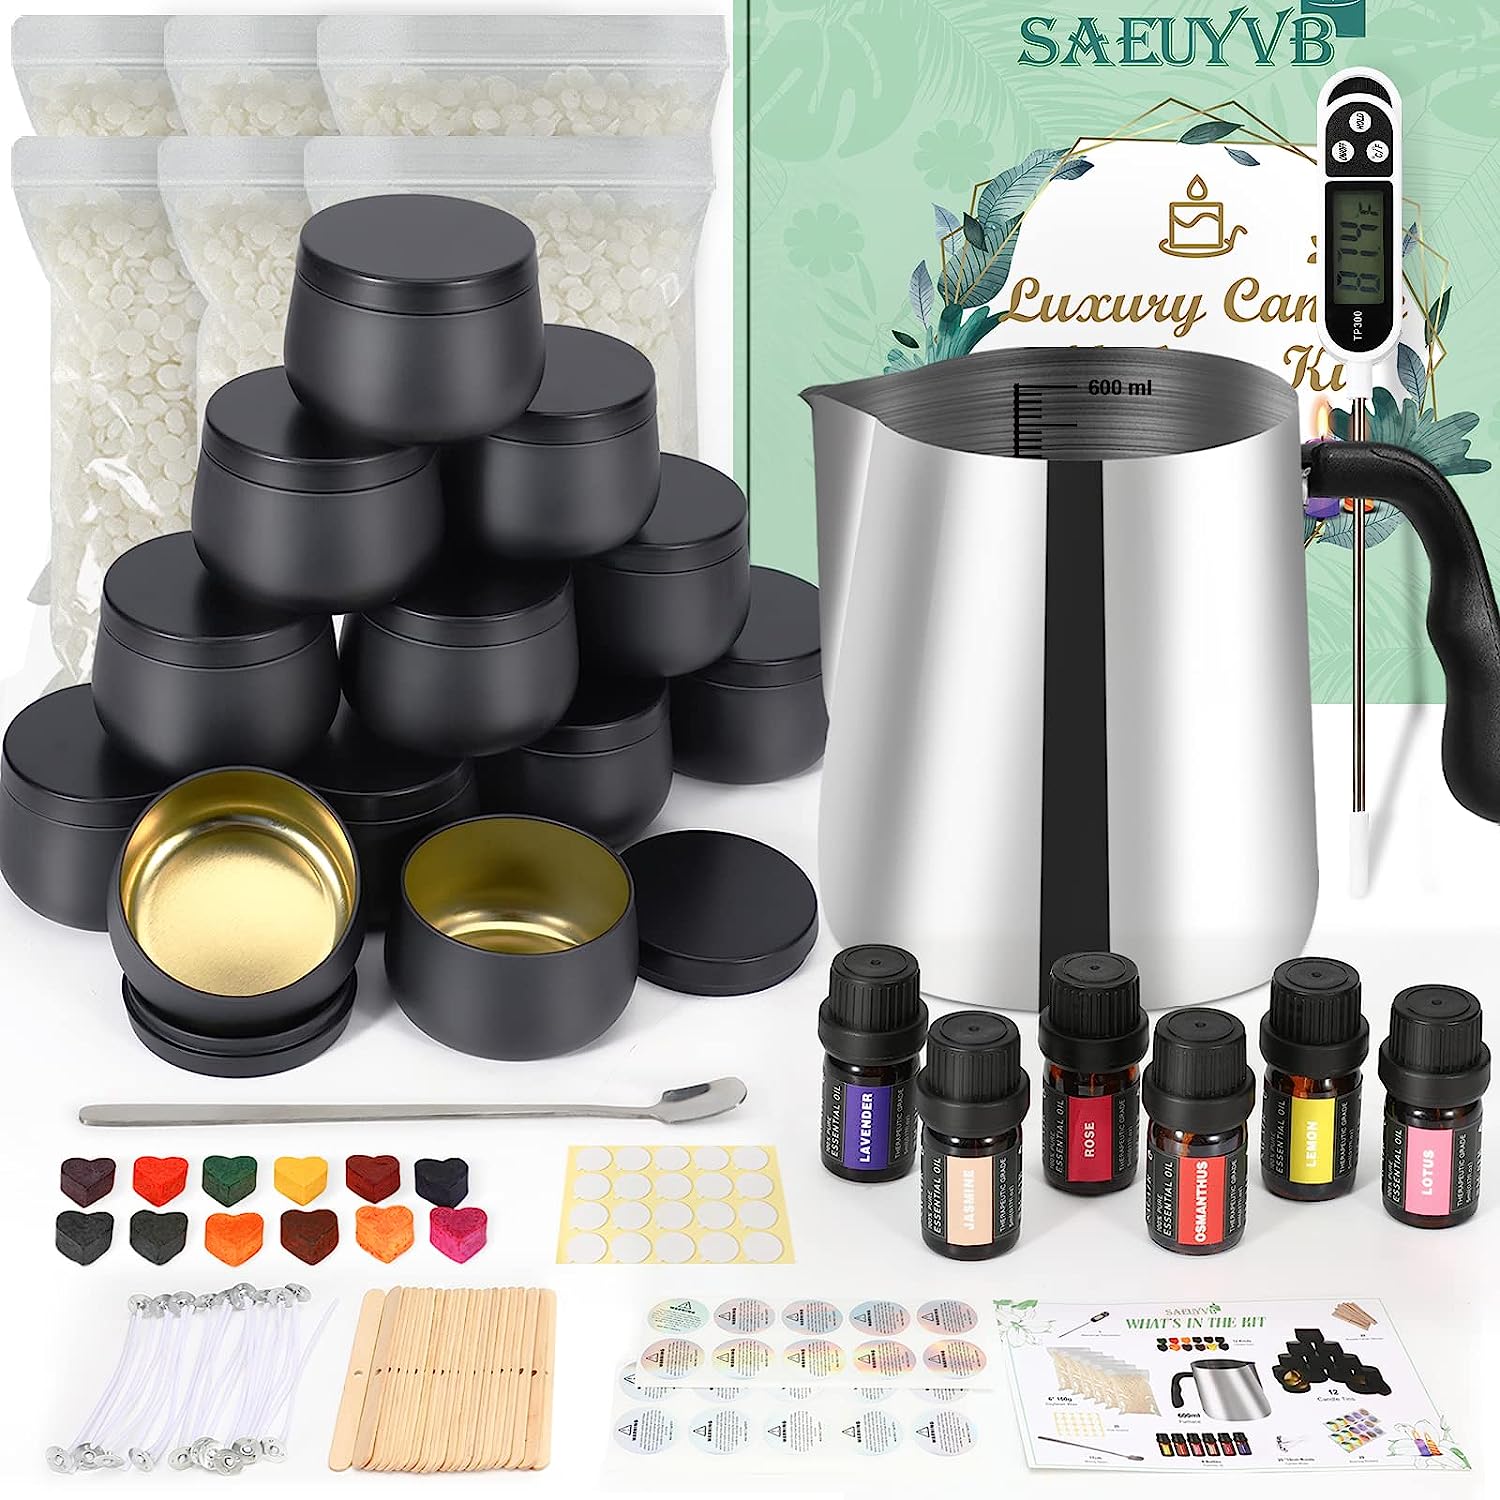 SAEUYVB Candle Making Kit - Candle Making Kit for [...]